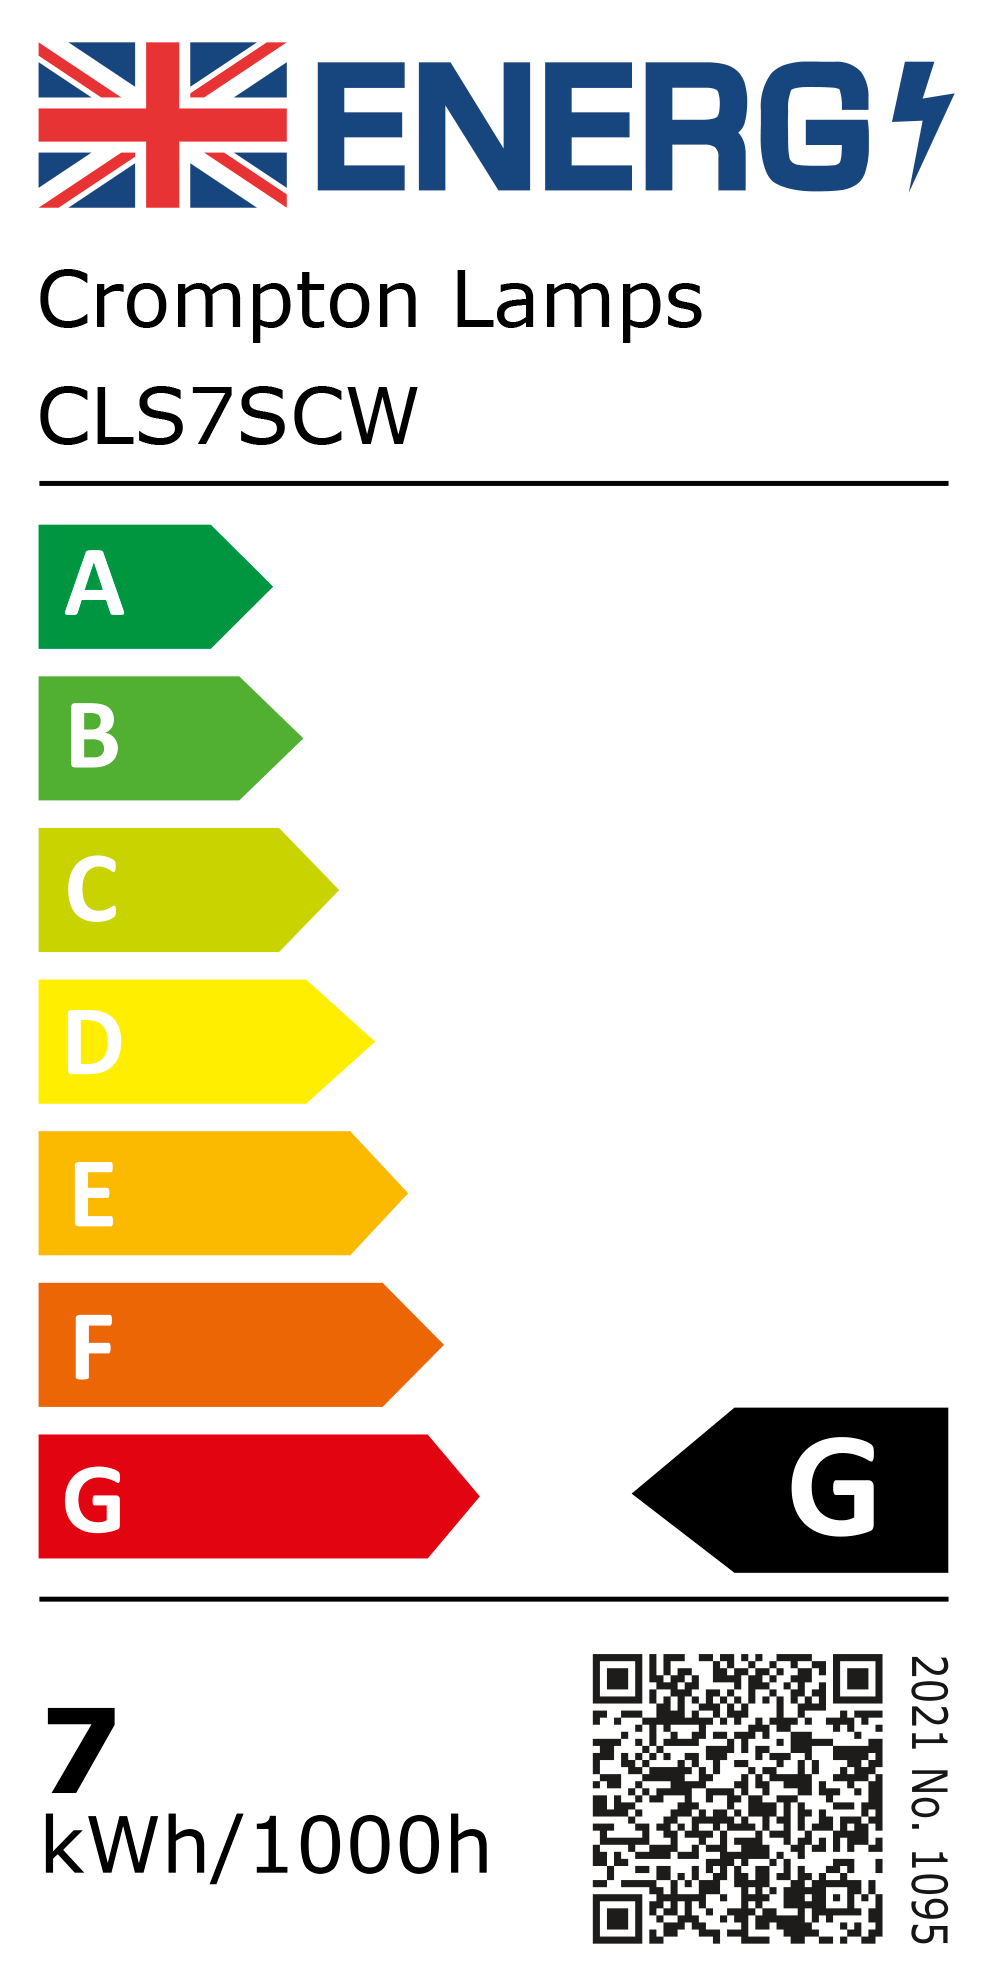 New 2021 Energy Rating Label: Stock Code CLS7SCW